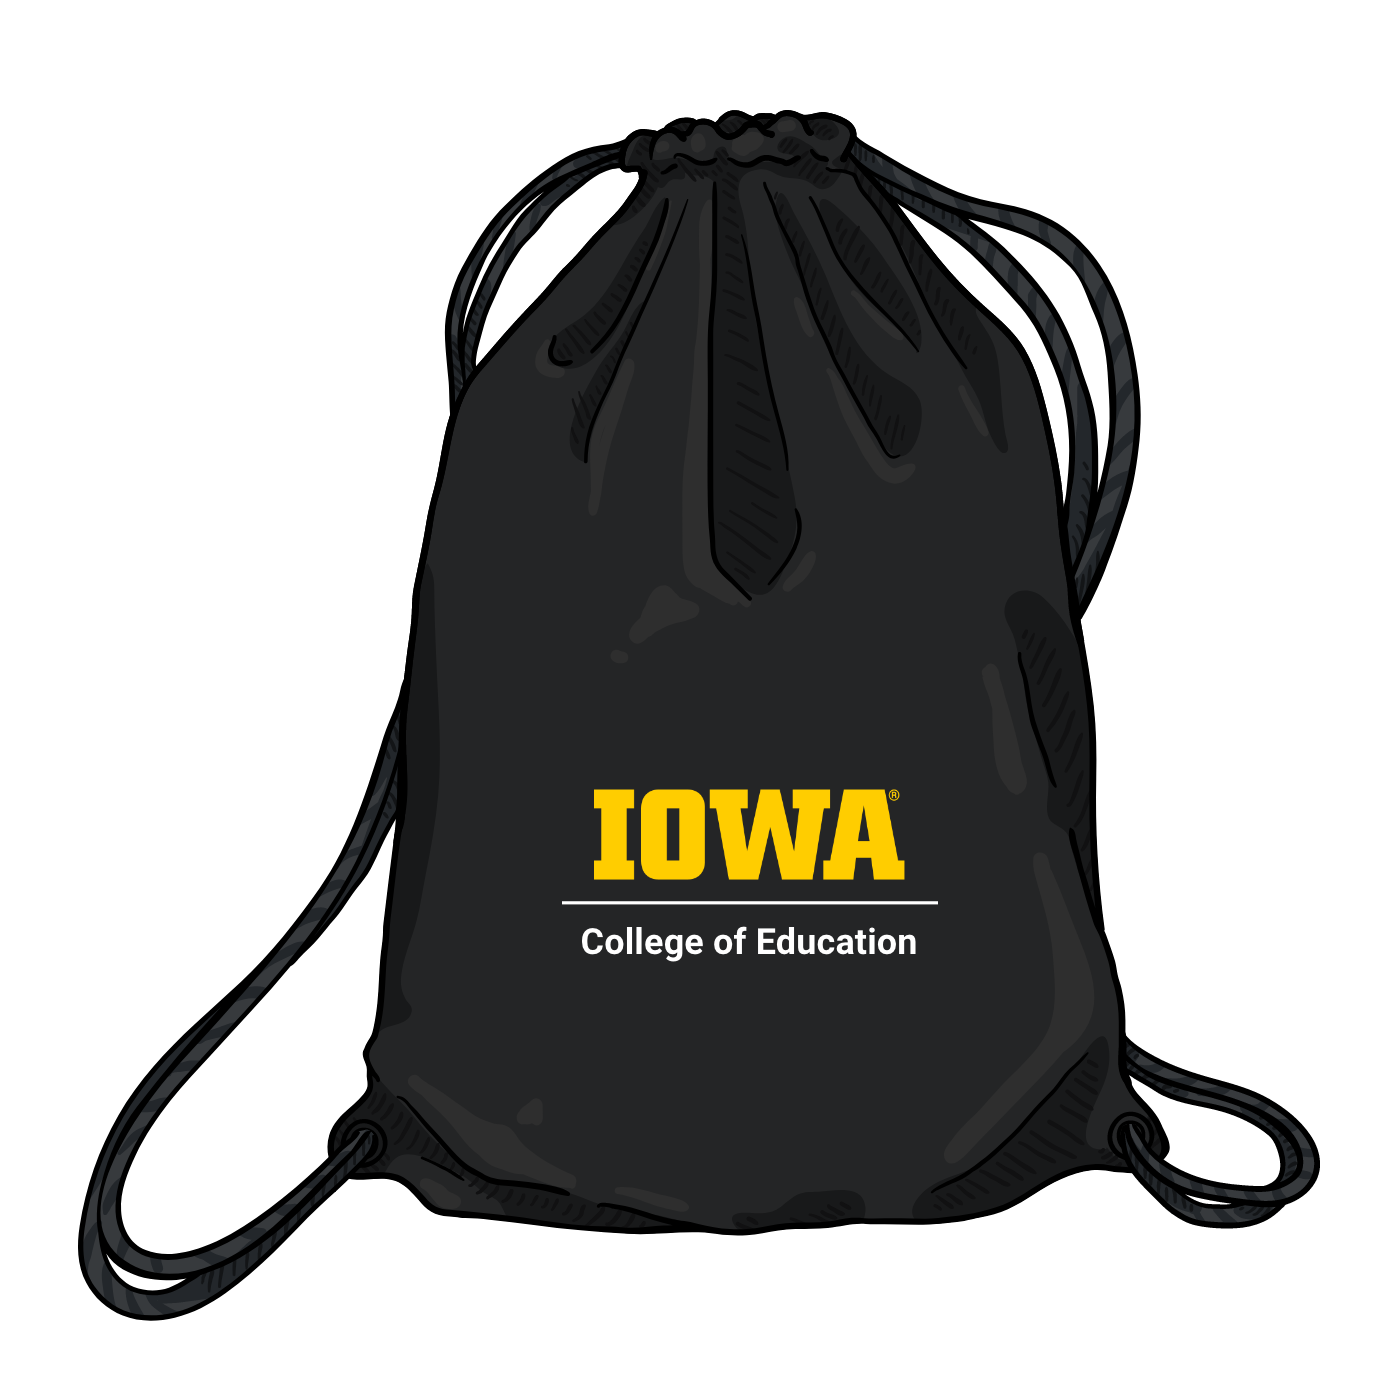 Black string bag with block IOWA logo displayed as part of the College of Education lockup